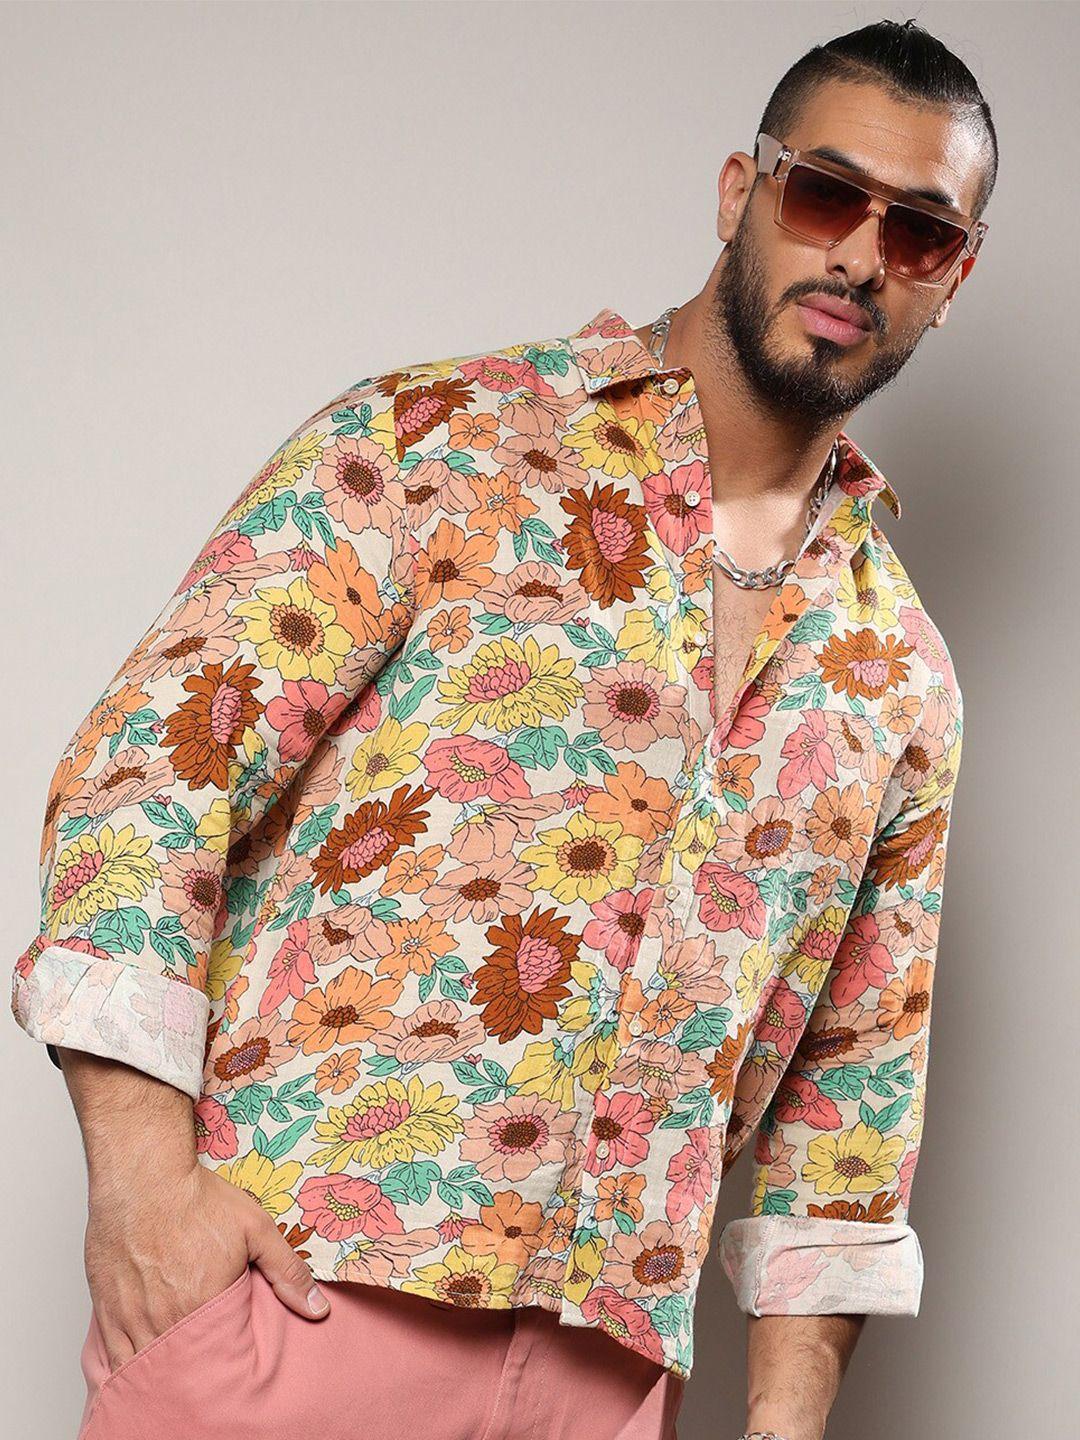 instafab plus classic floral printed spread collar cotton casual shirt